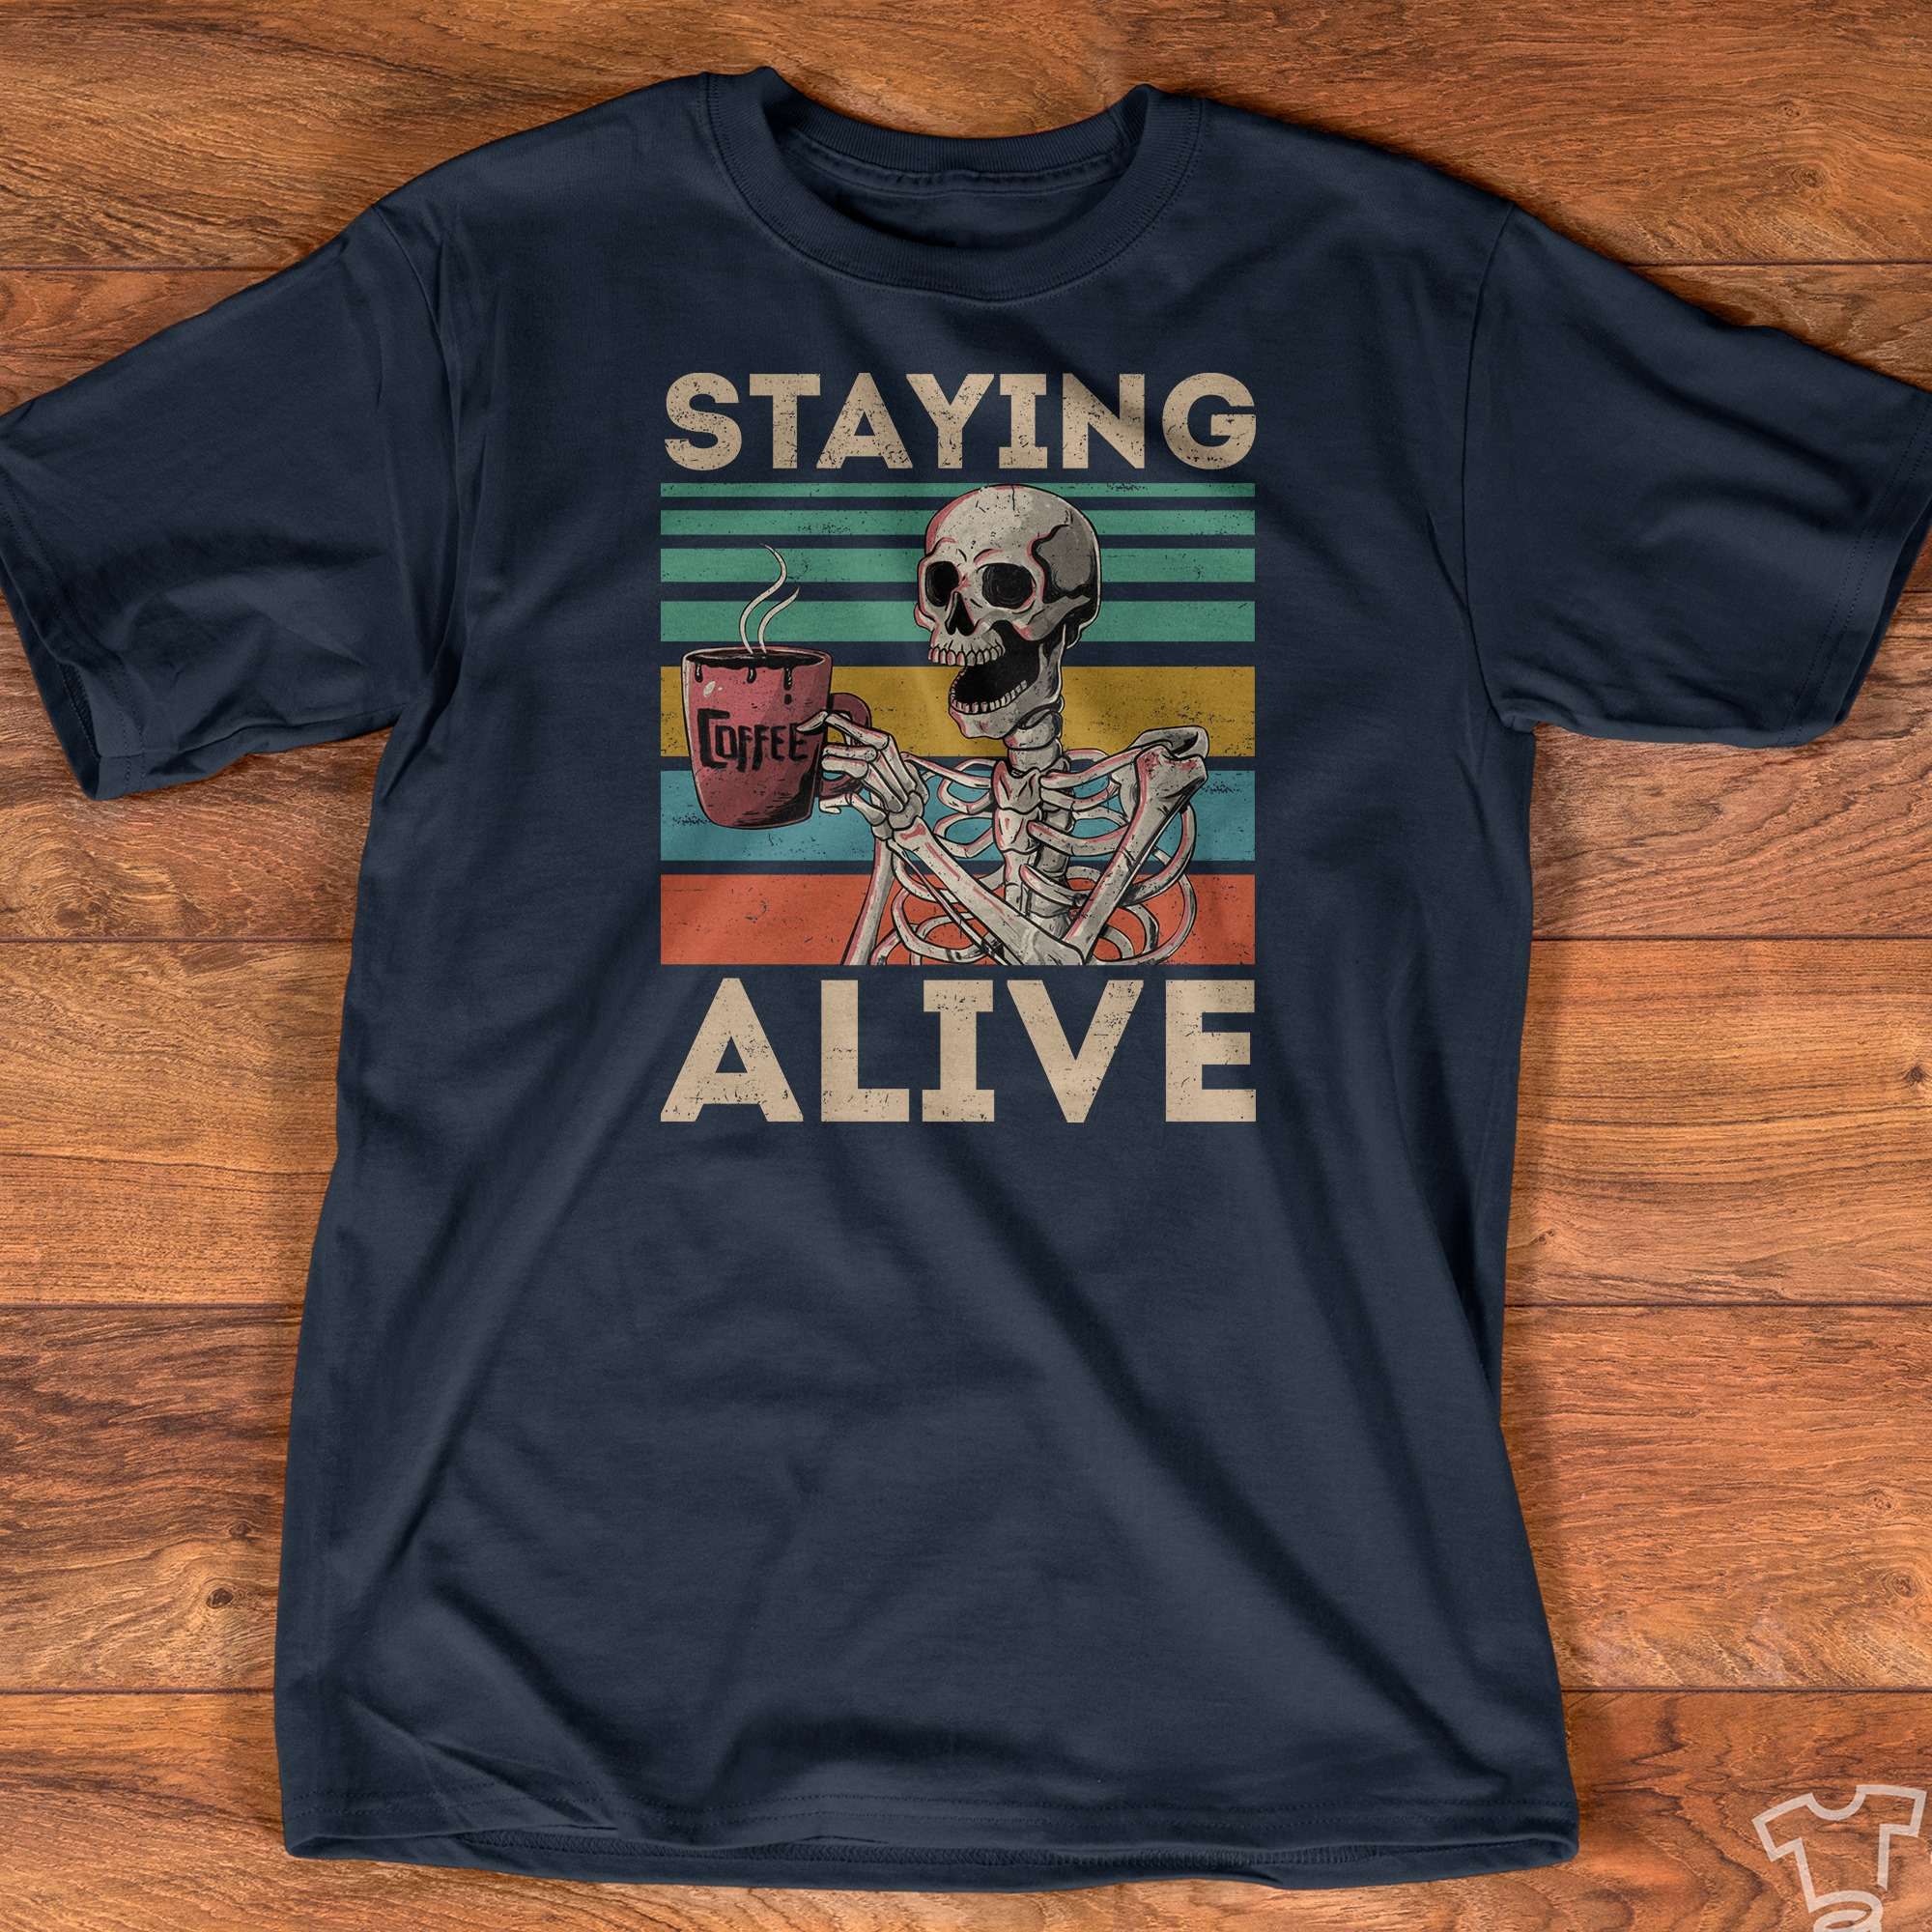 Staying alive - Skull and coffee, alive with coffee